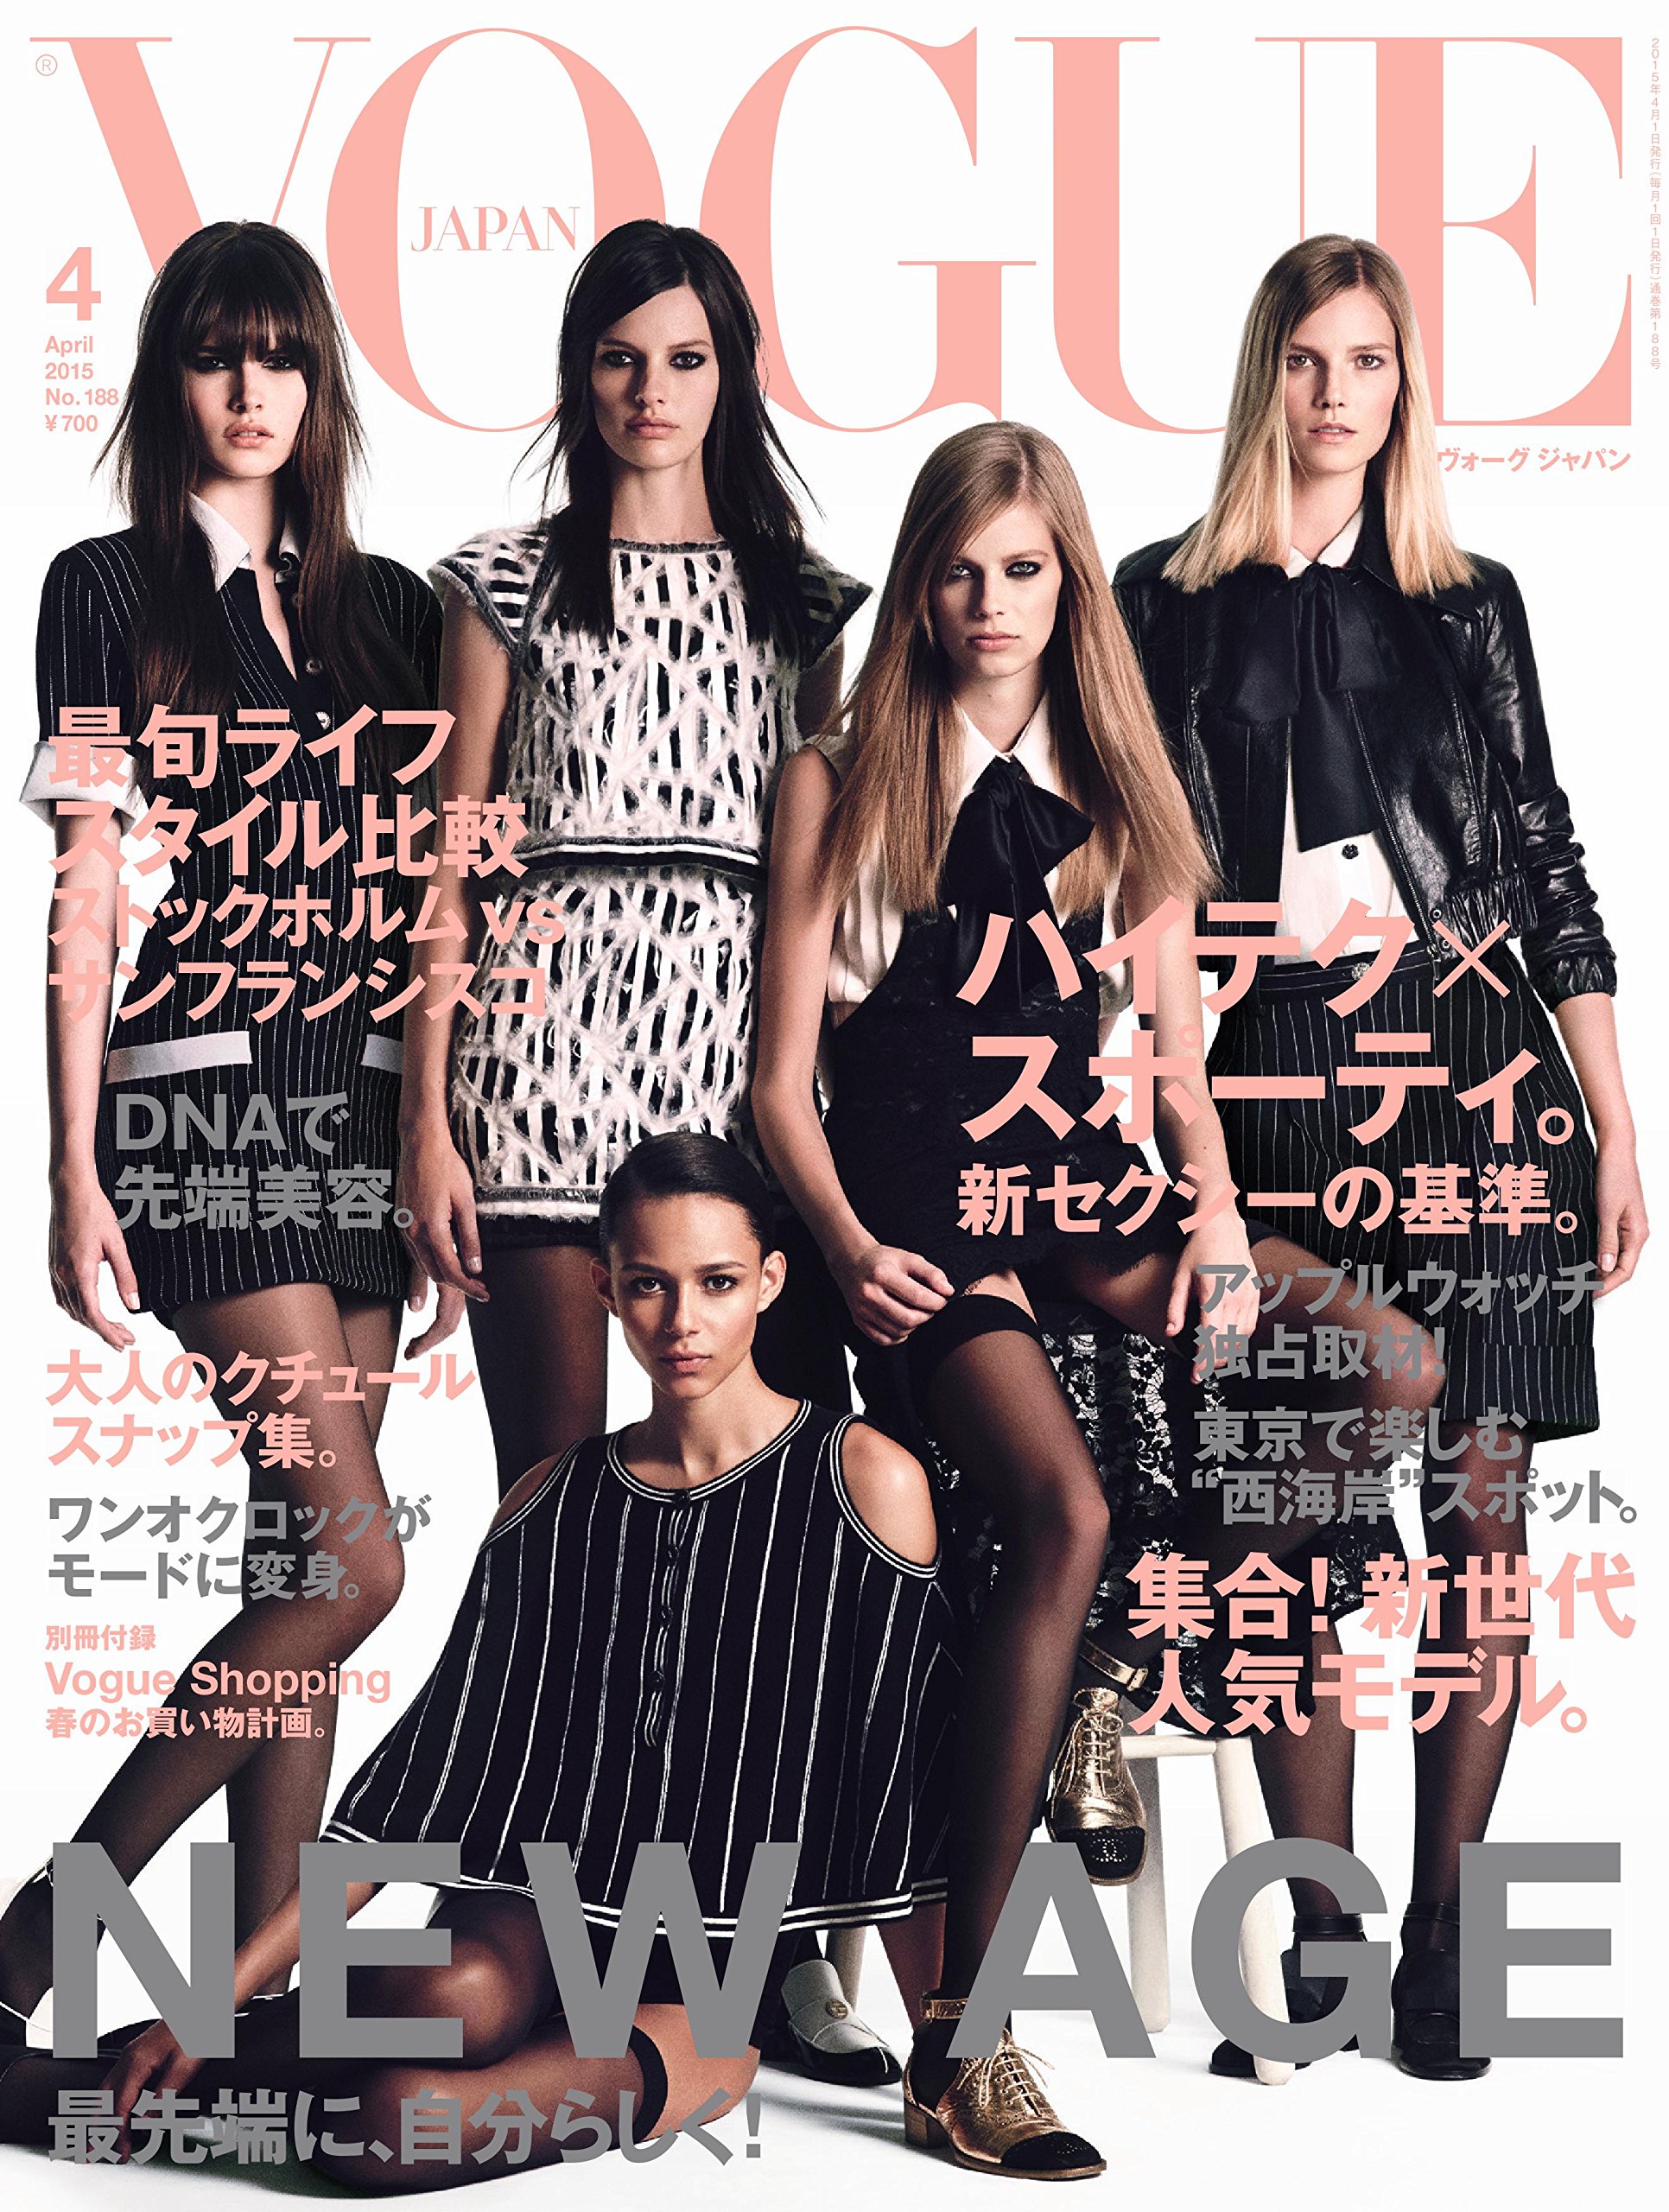 Beautiful Fashion Models Amanda Murphy, Binx Walton, Lexi Boling, Suvi Koponen, And Vanessa Moody Modeling For The Cover Of Vogue Japan. How To Model In Tokyo Japan In Asia.